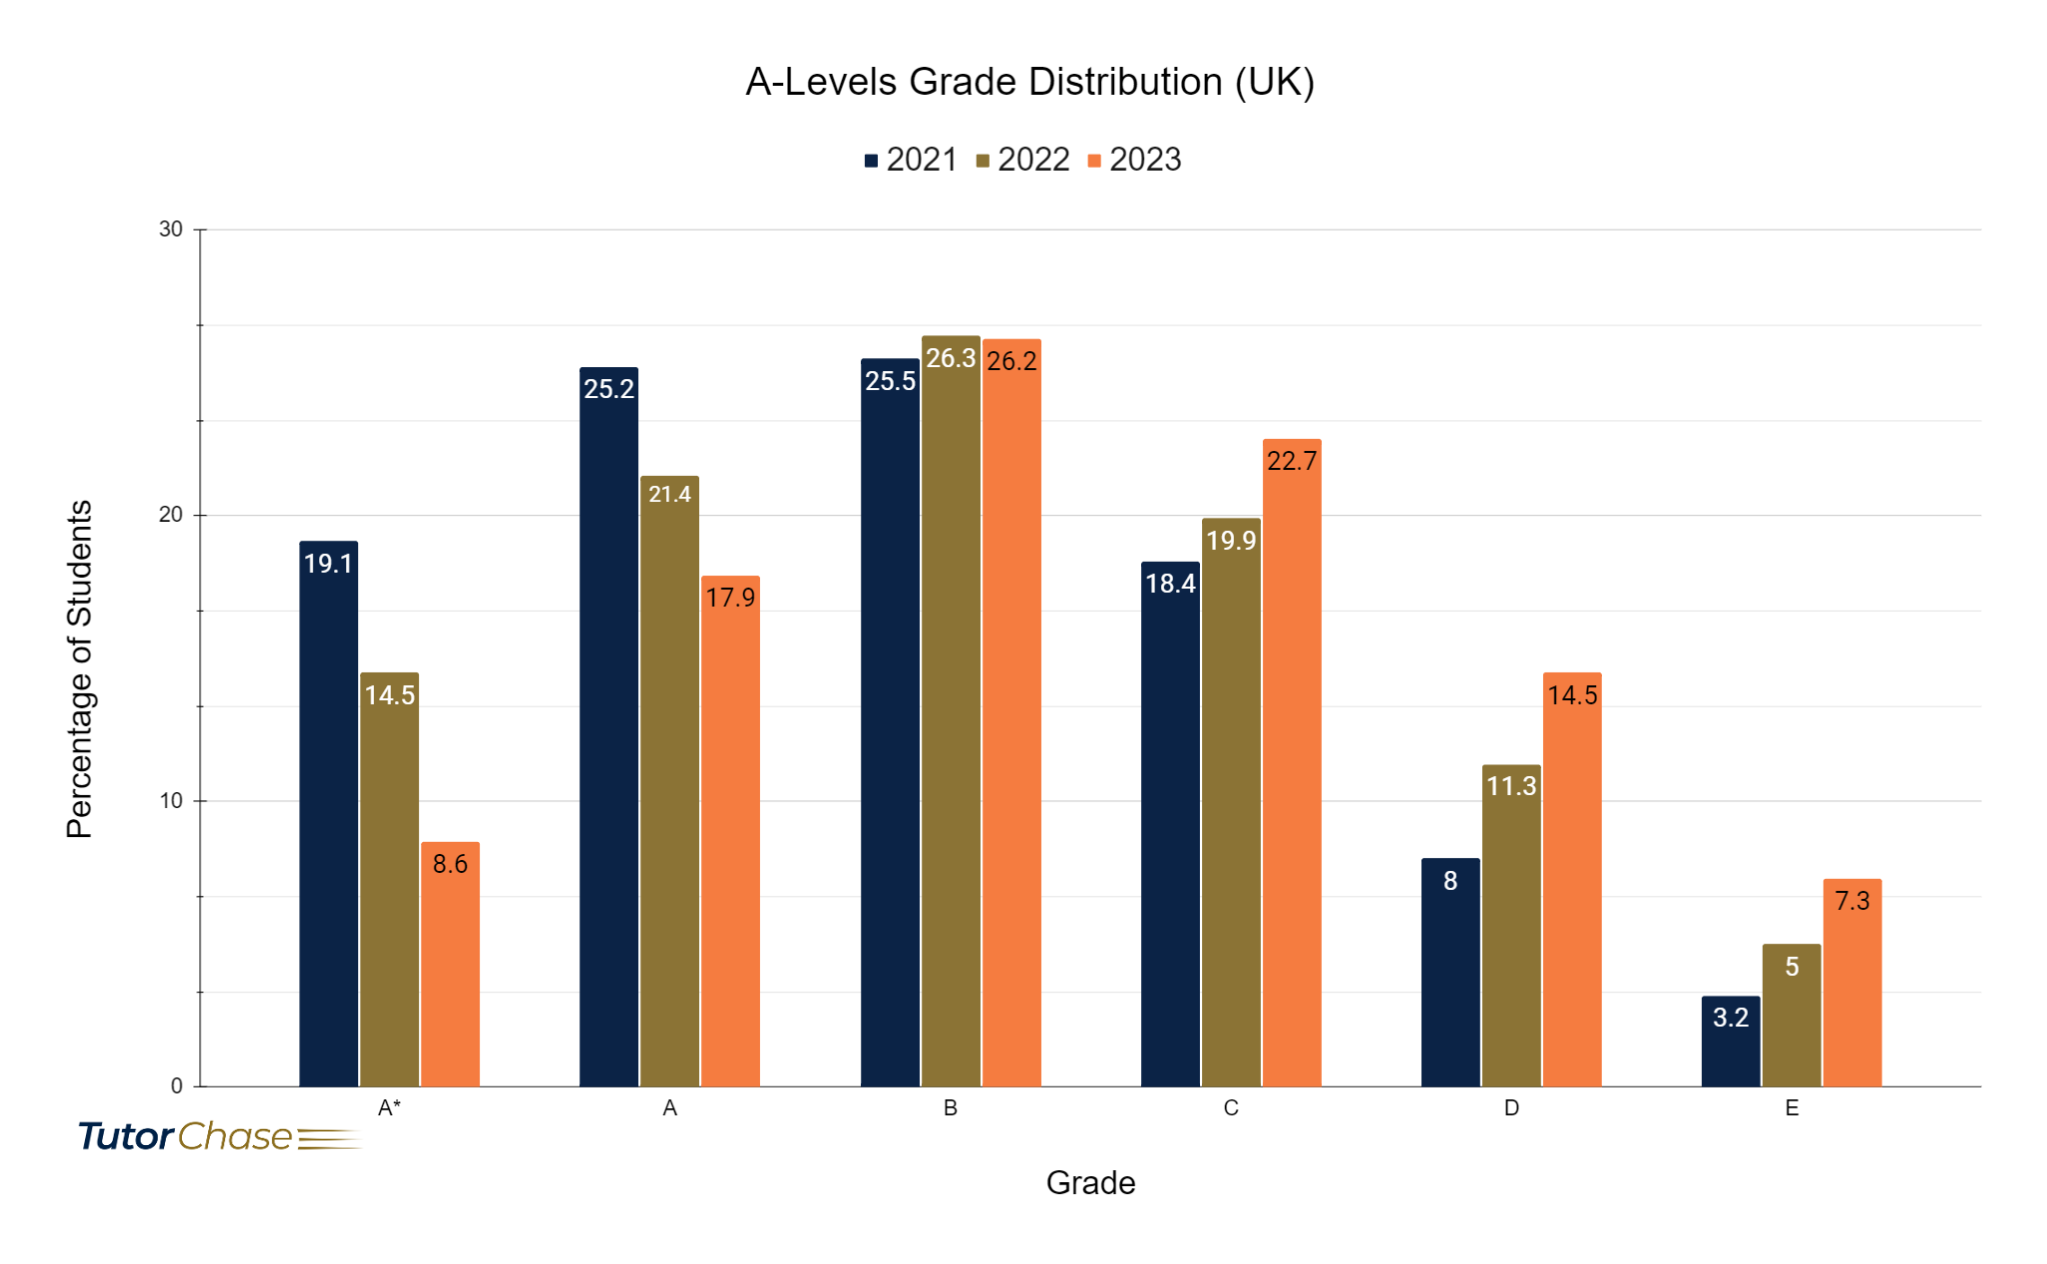 Grades distribution of A-Levels in UK 2021-2023